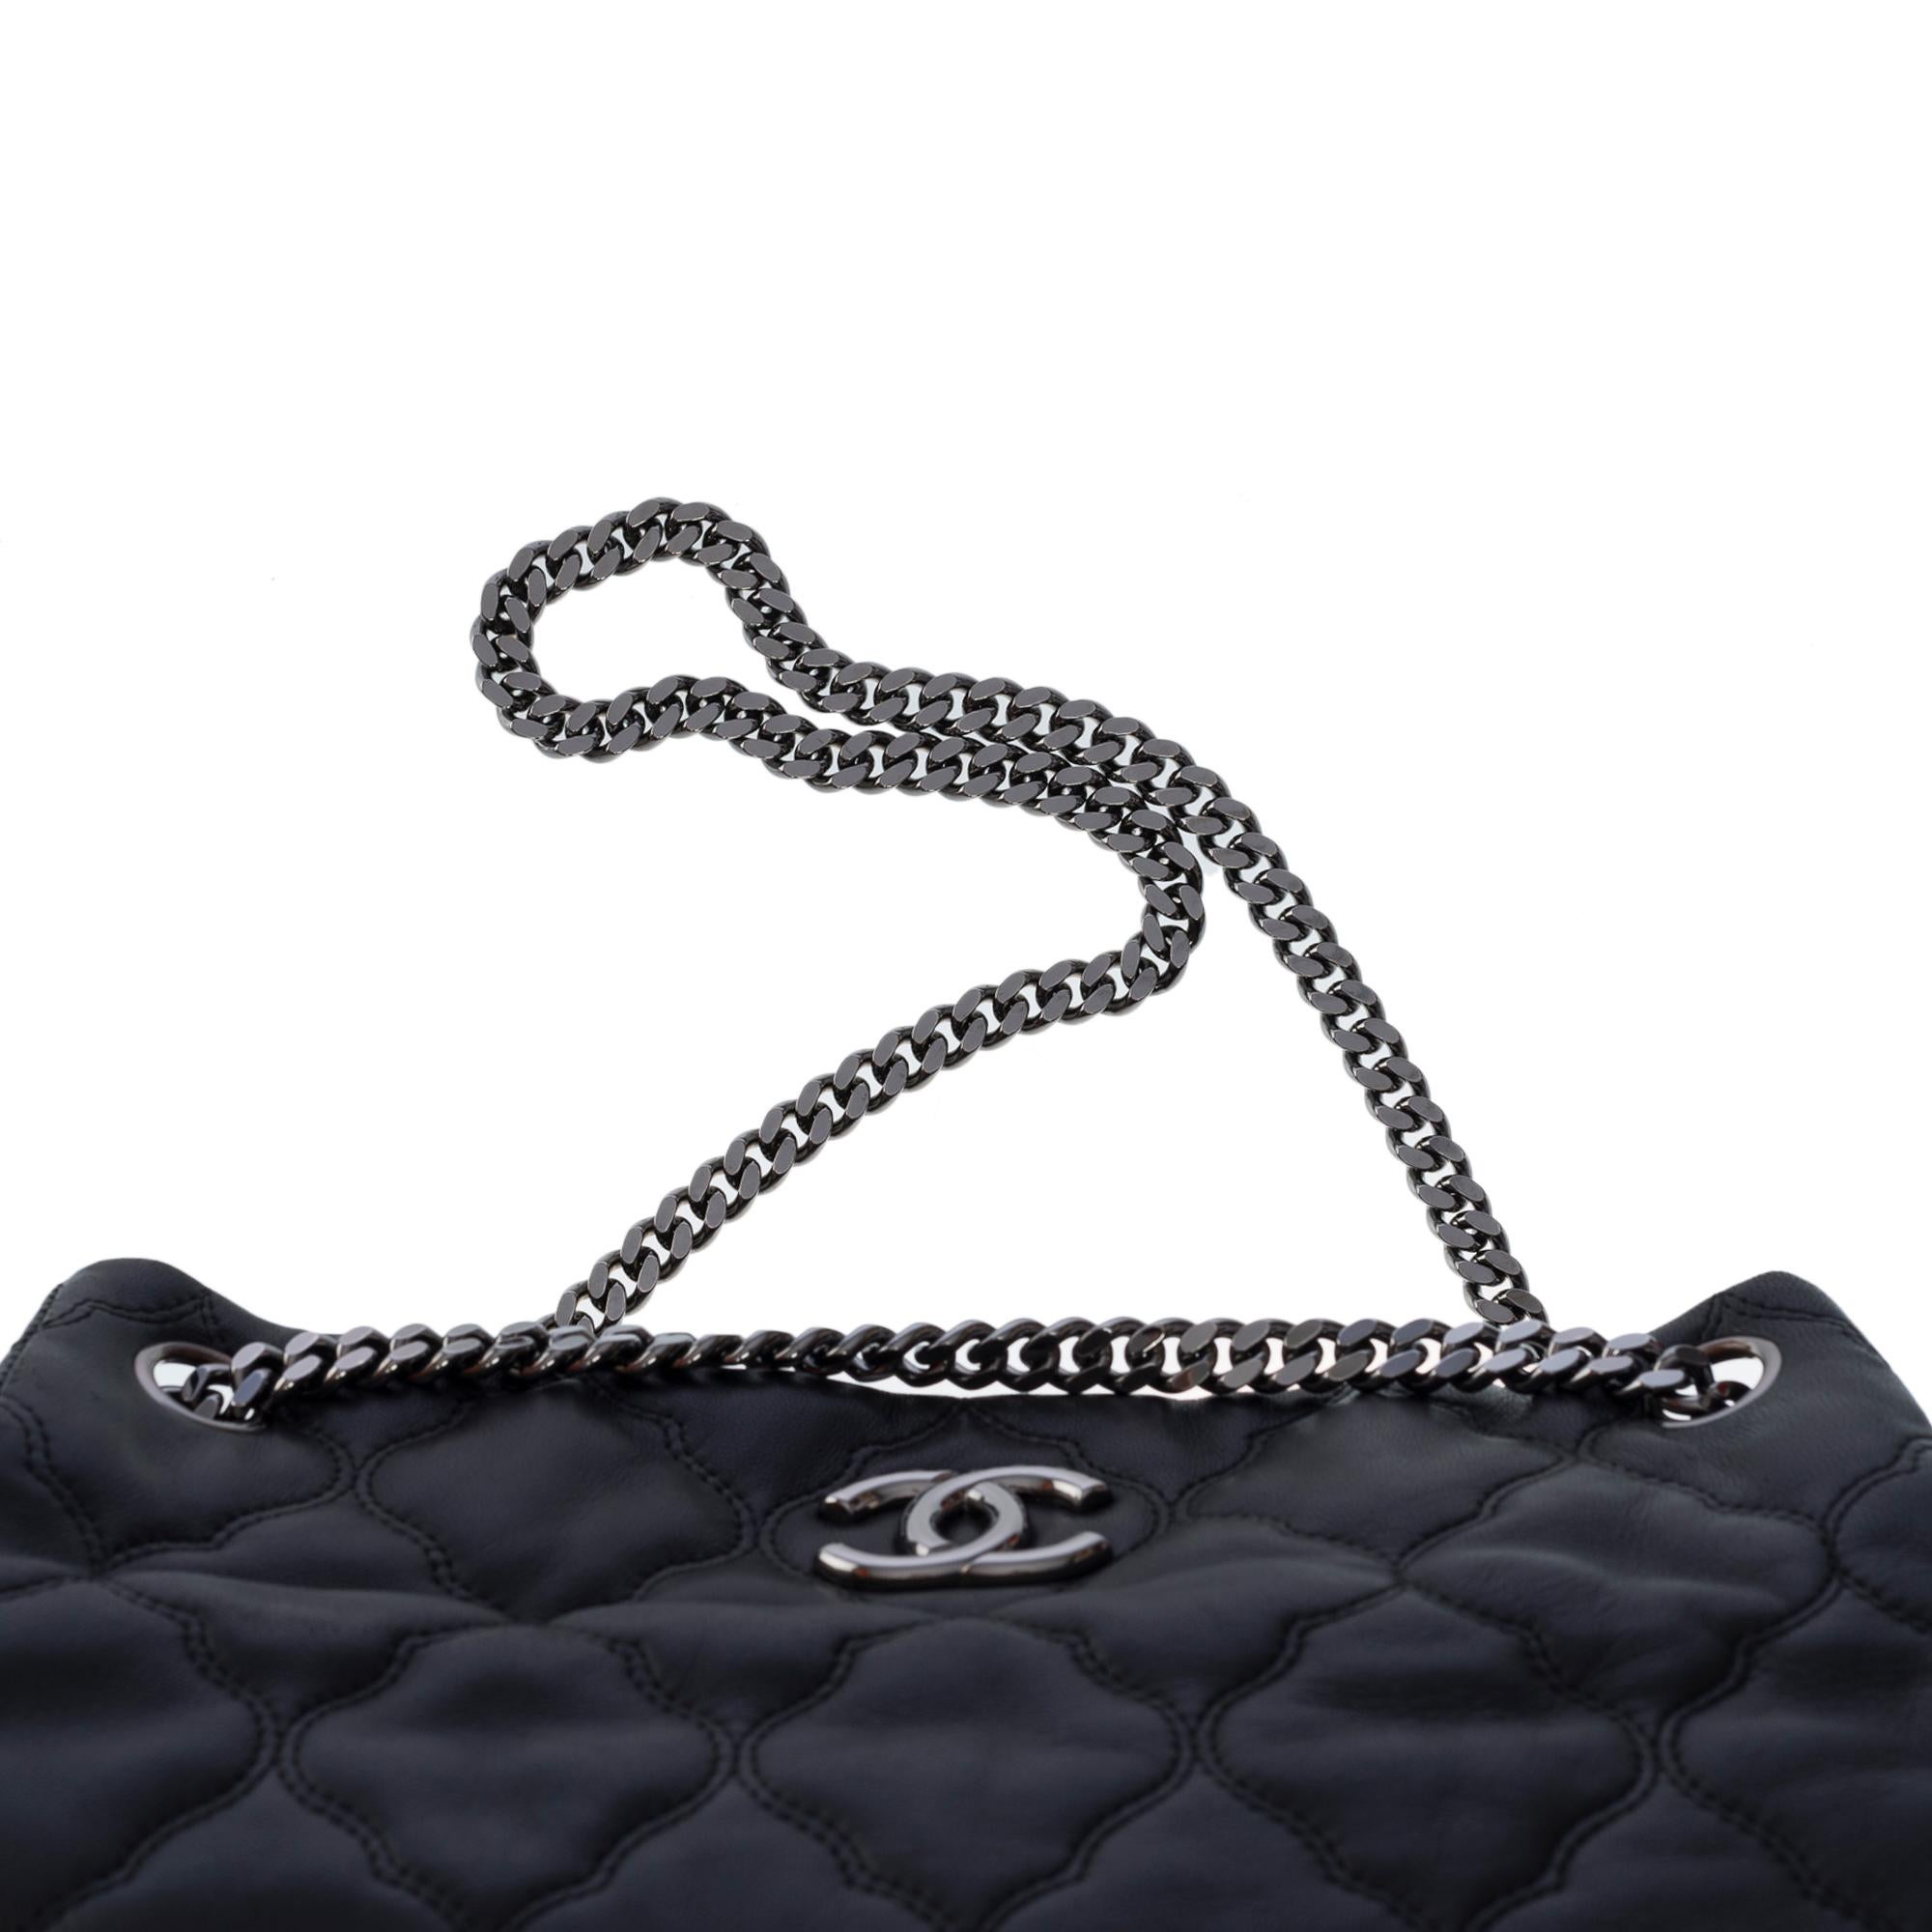 Amazing Chanel Hamptons shopping puffy bag in black quilted leather, SHW 2